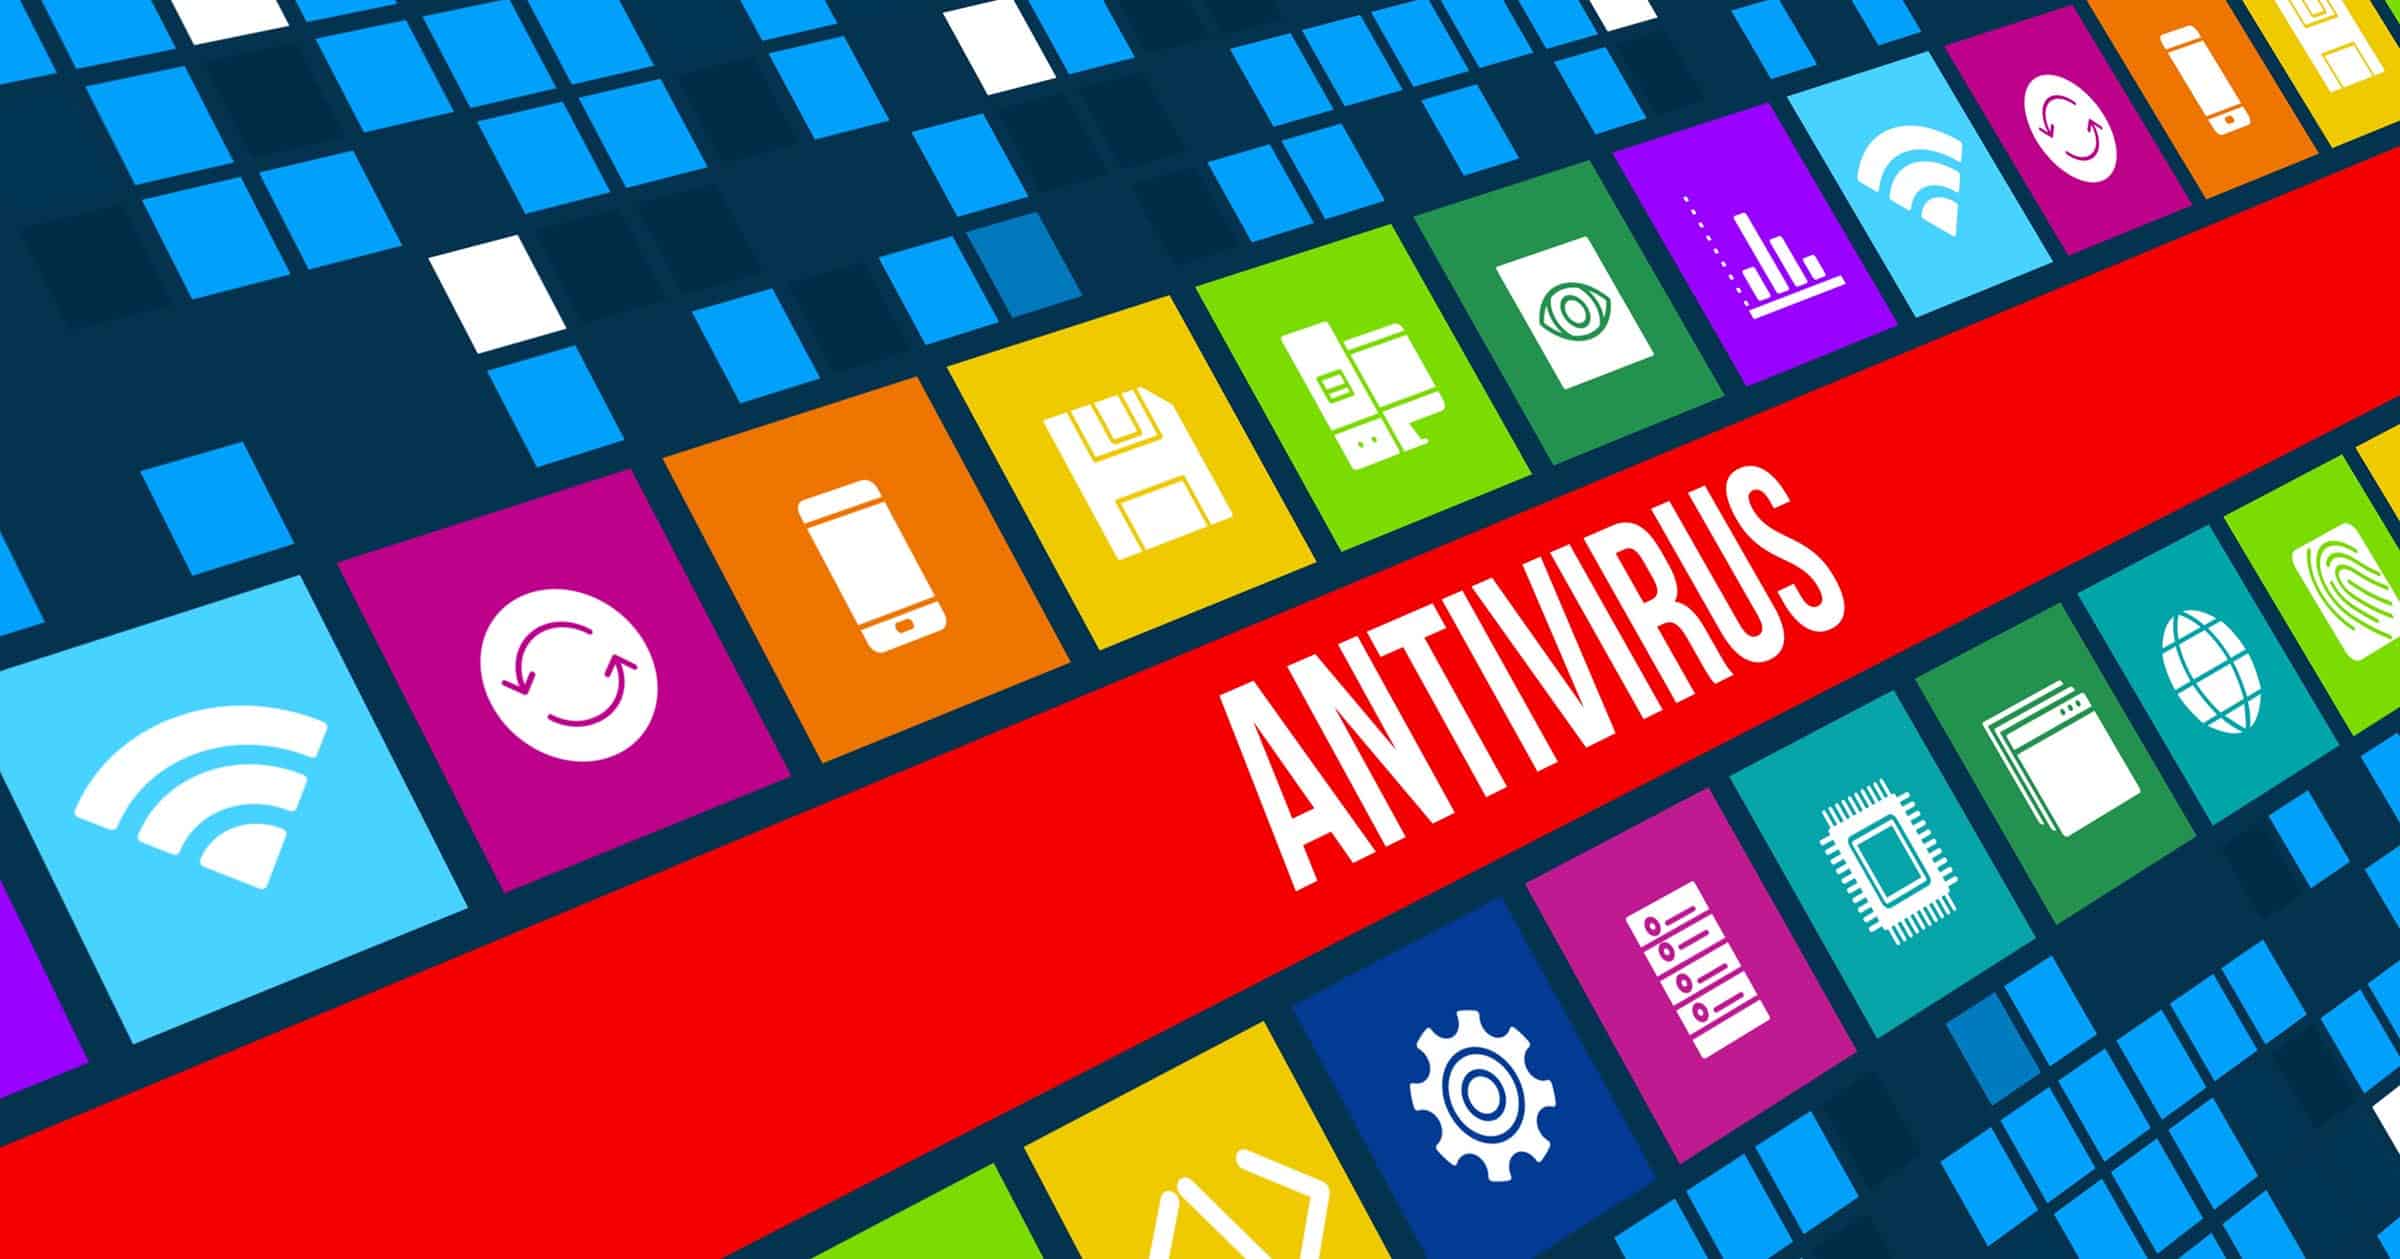 Antivirus concept image with technology icons and copyspace